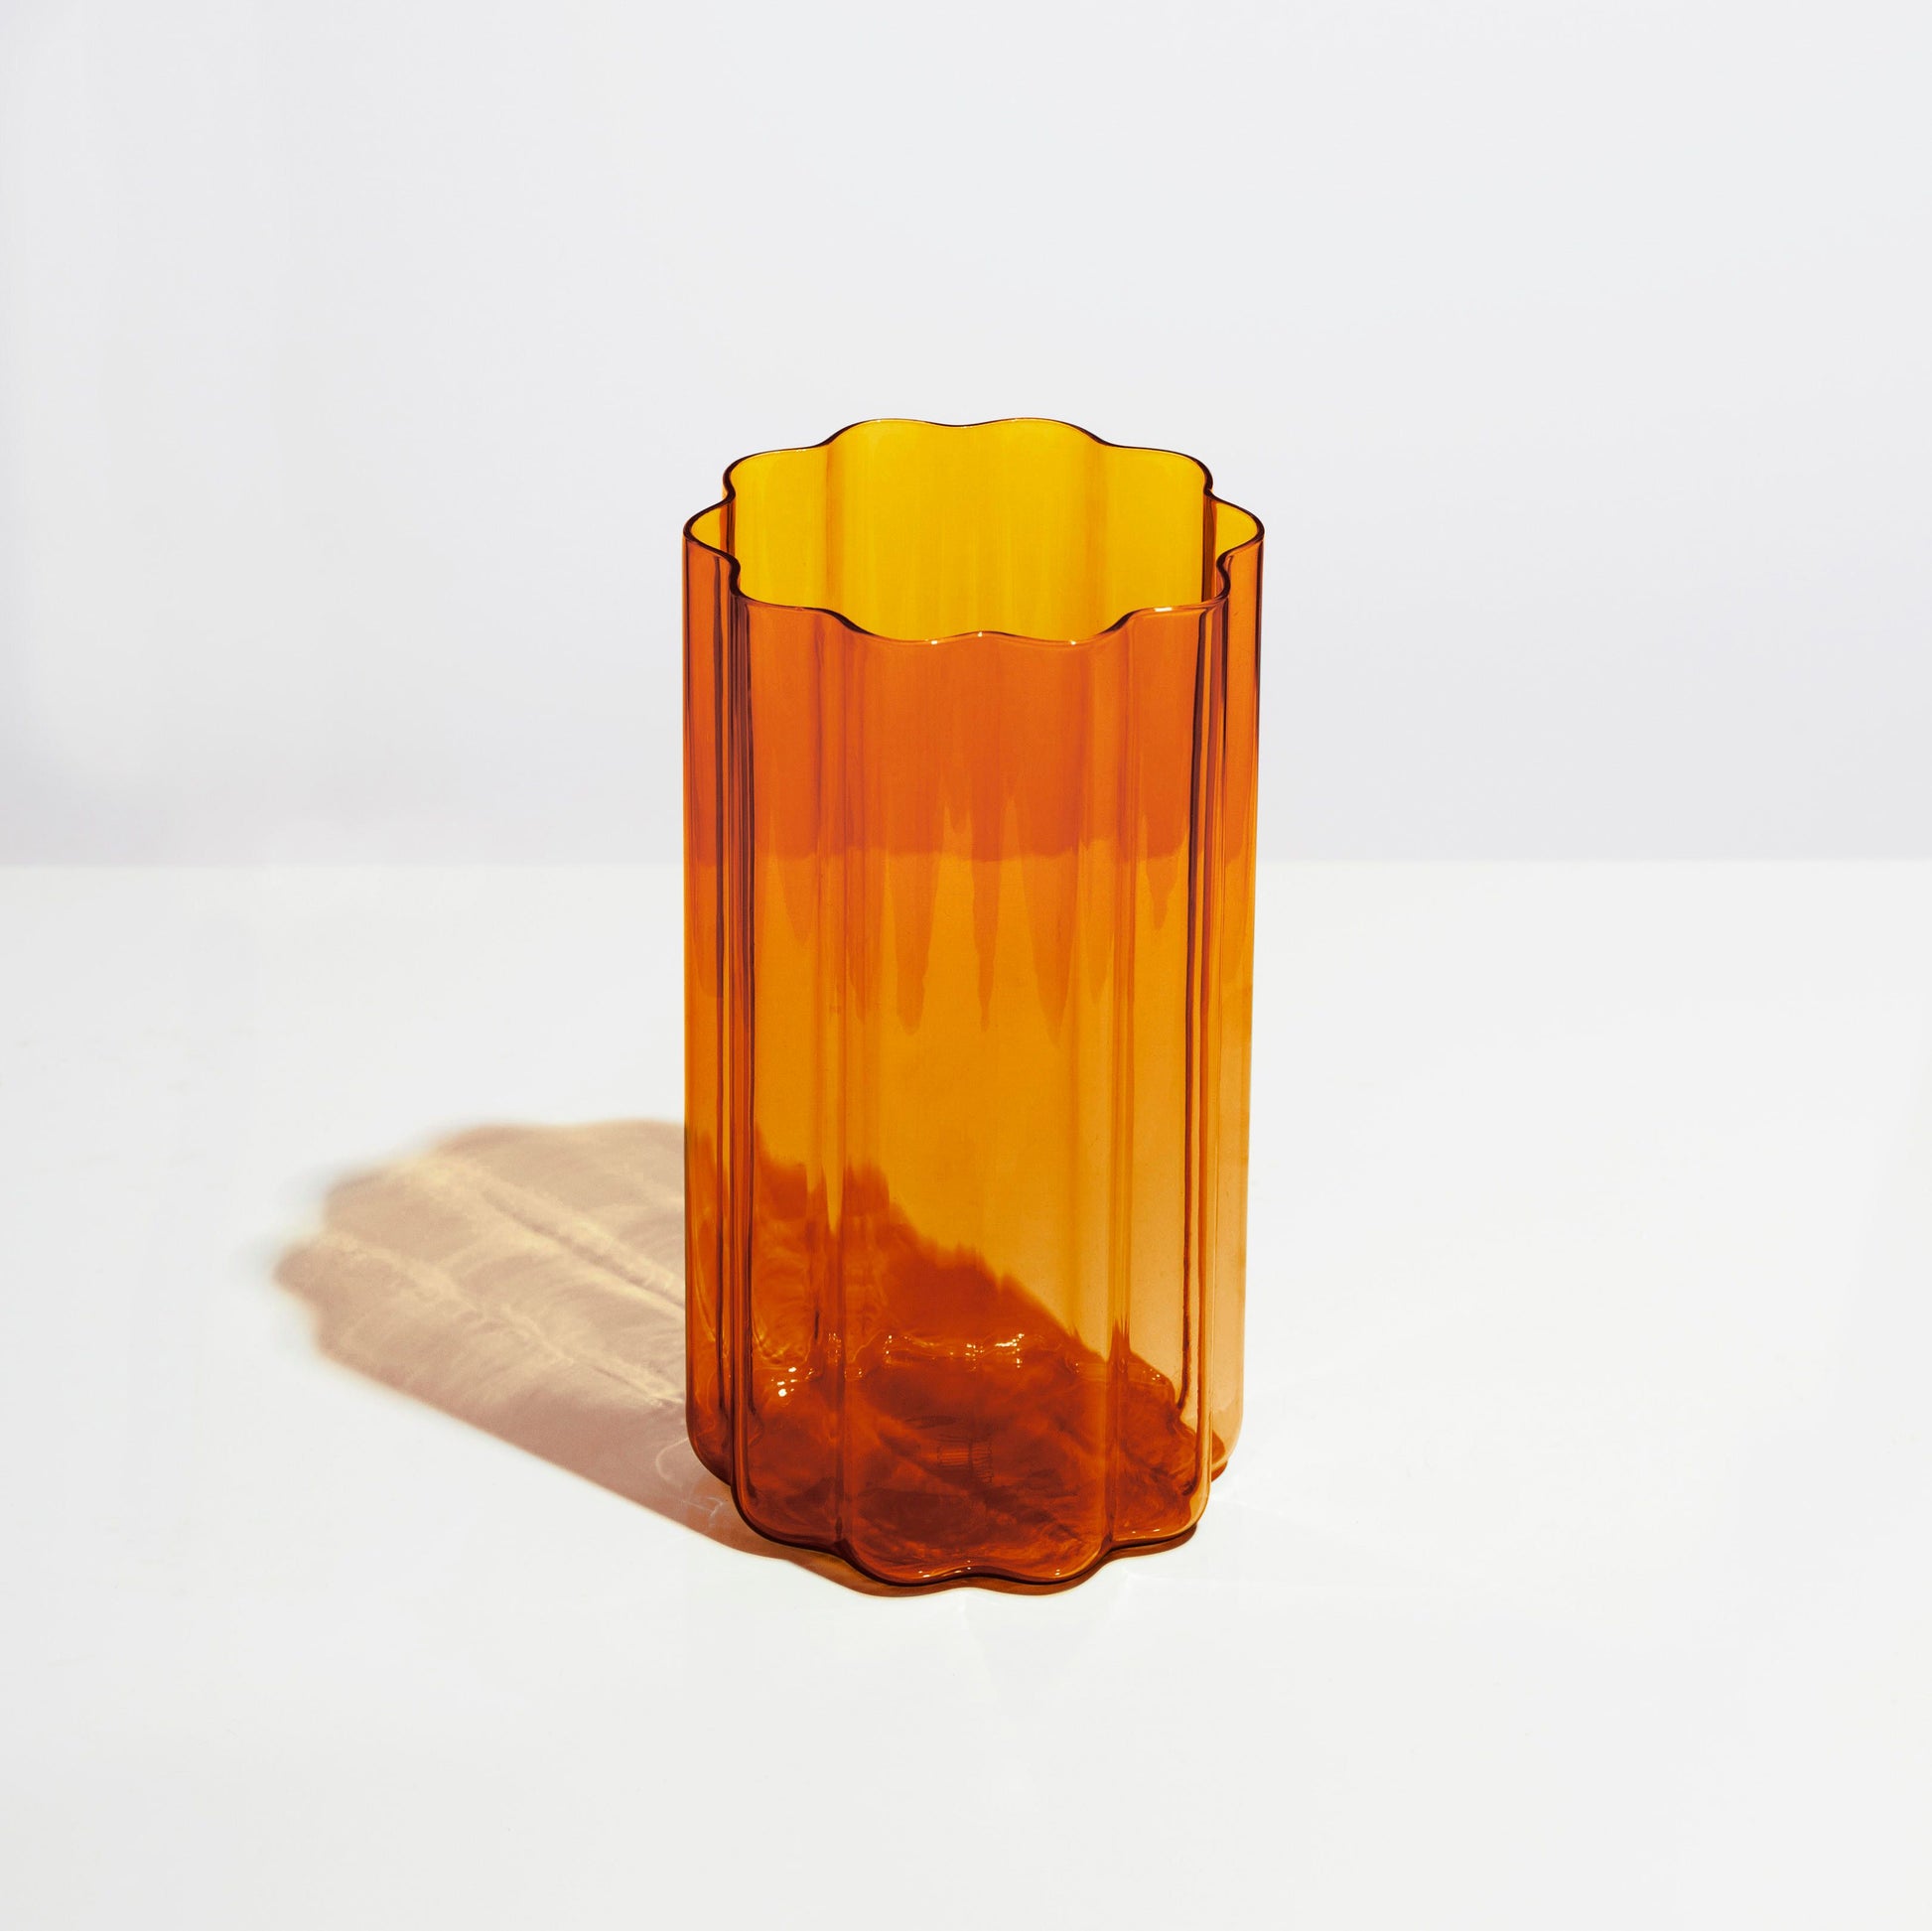 FAZEEK’s Wave Vase - Amber is finely crafted from hand-blown coloured glass and features our signature rippled edge. Beautiful in its simplicity, the Wave Vase will complement any space.